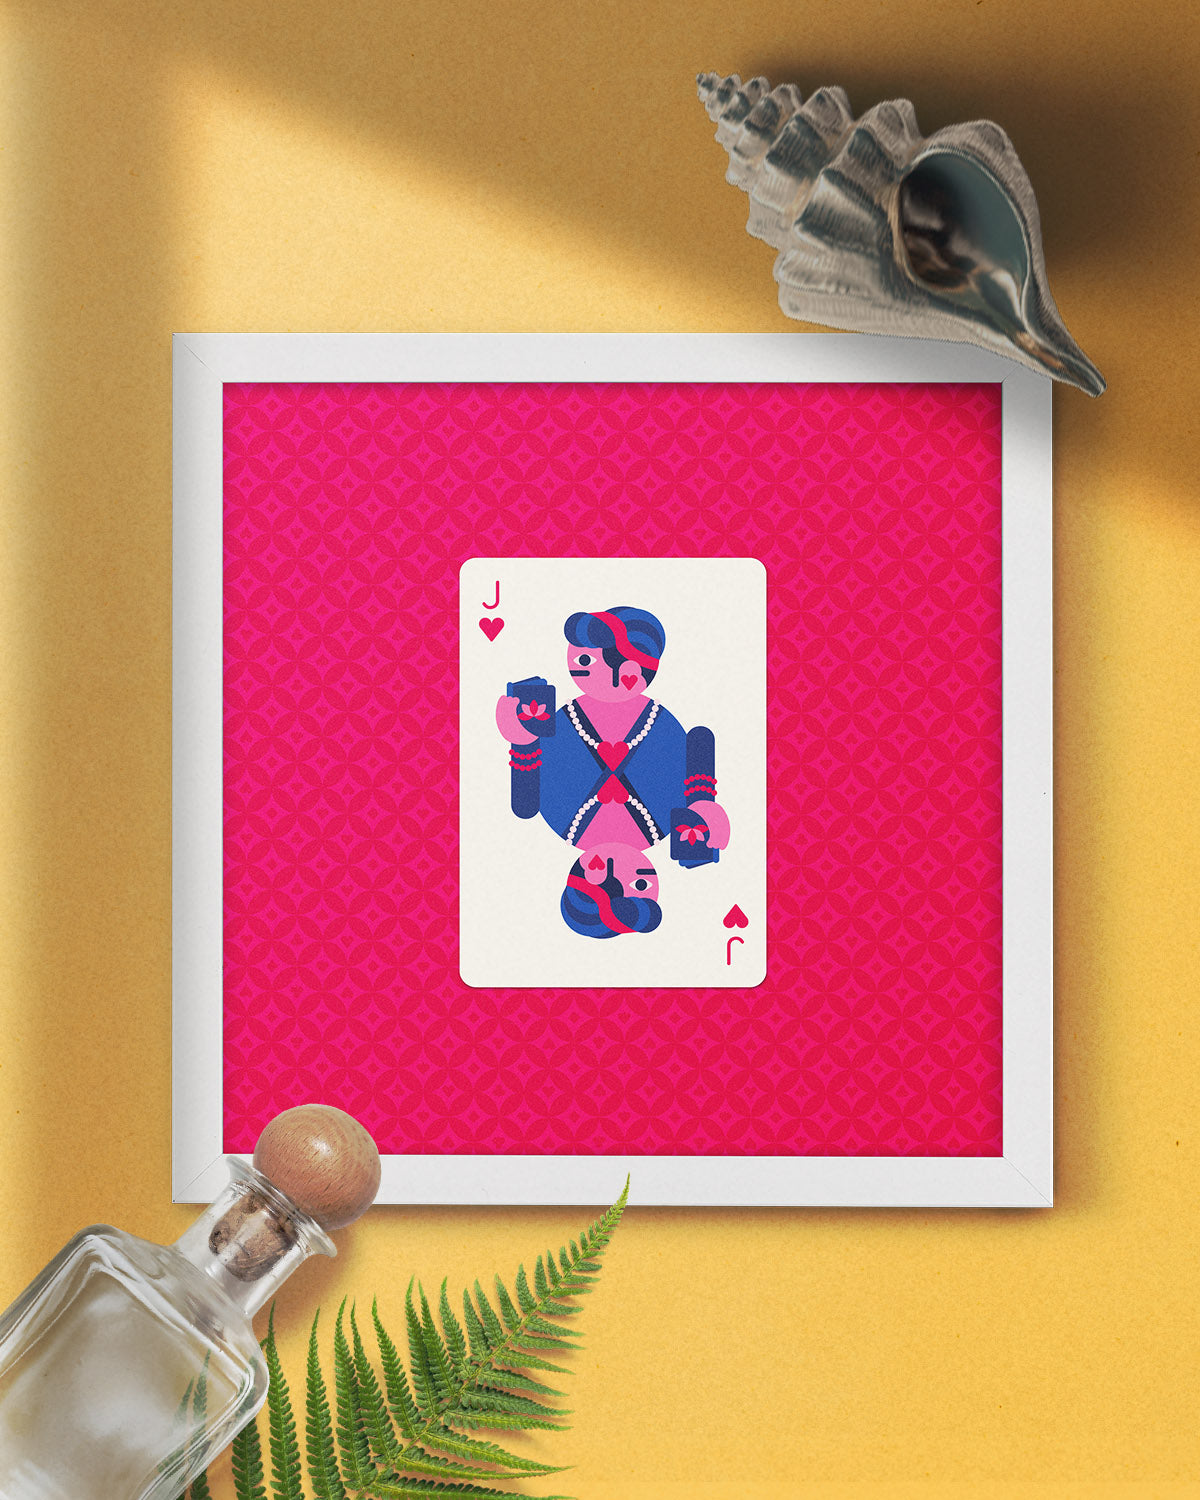 Jack of hearts - Square Frame - Mytype.store